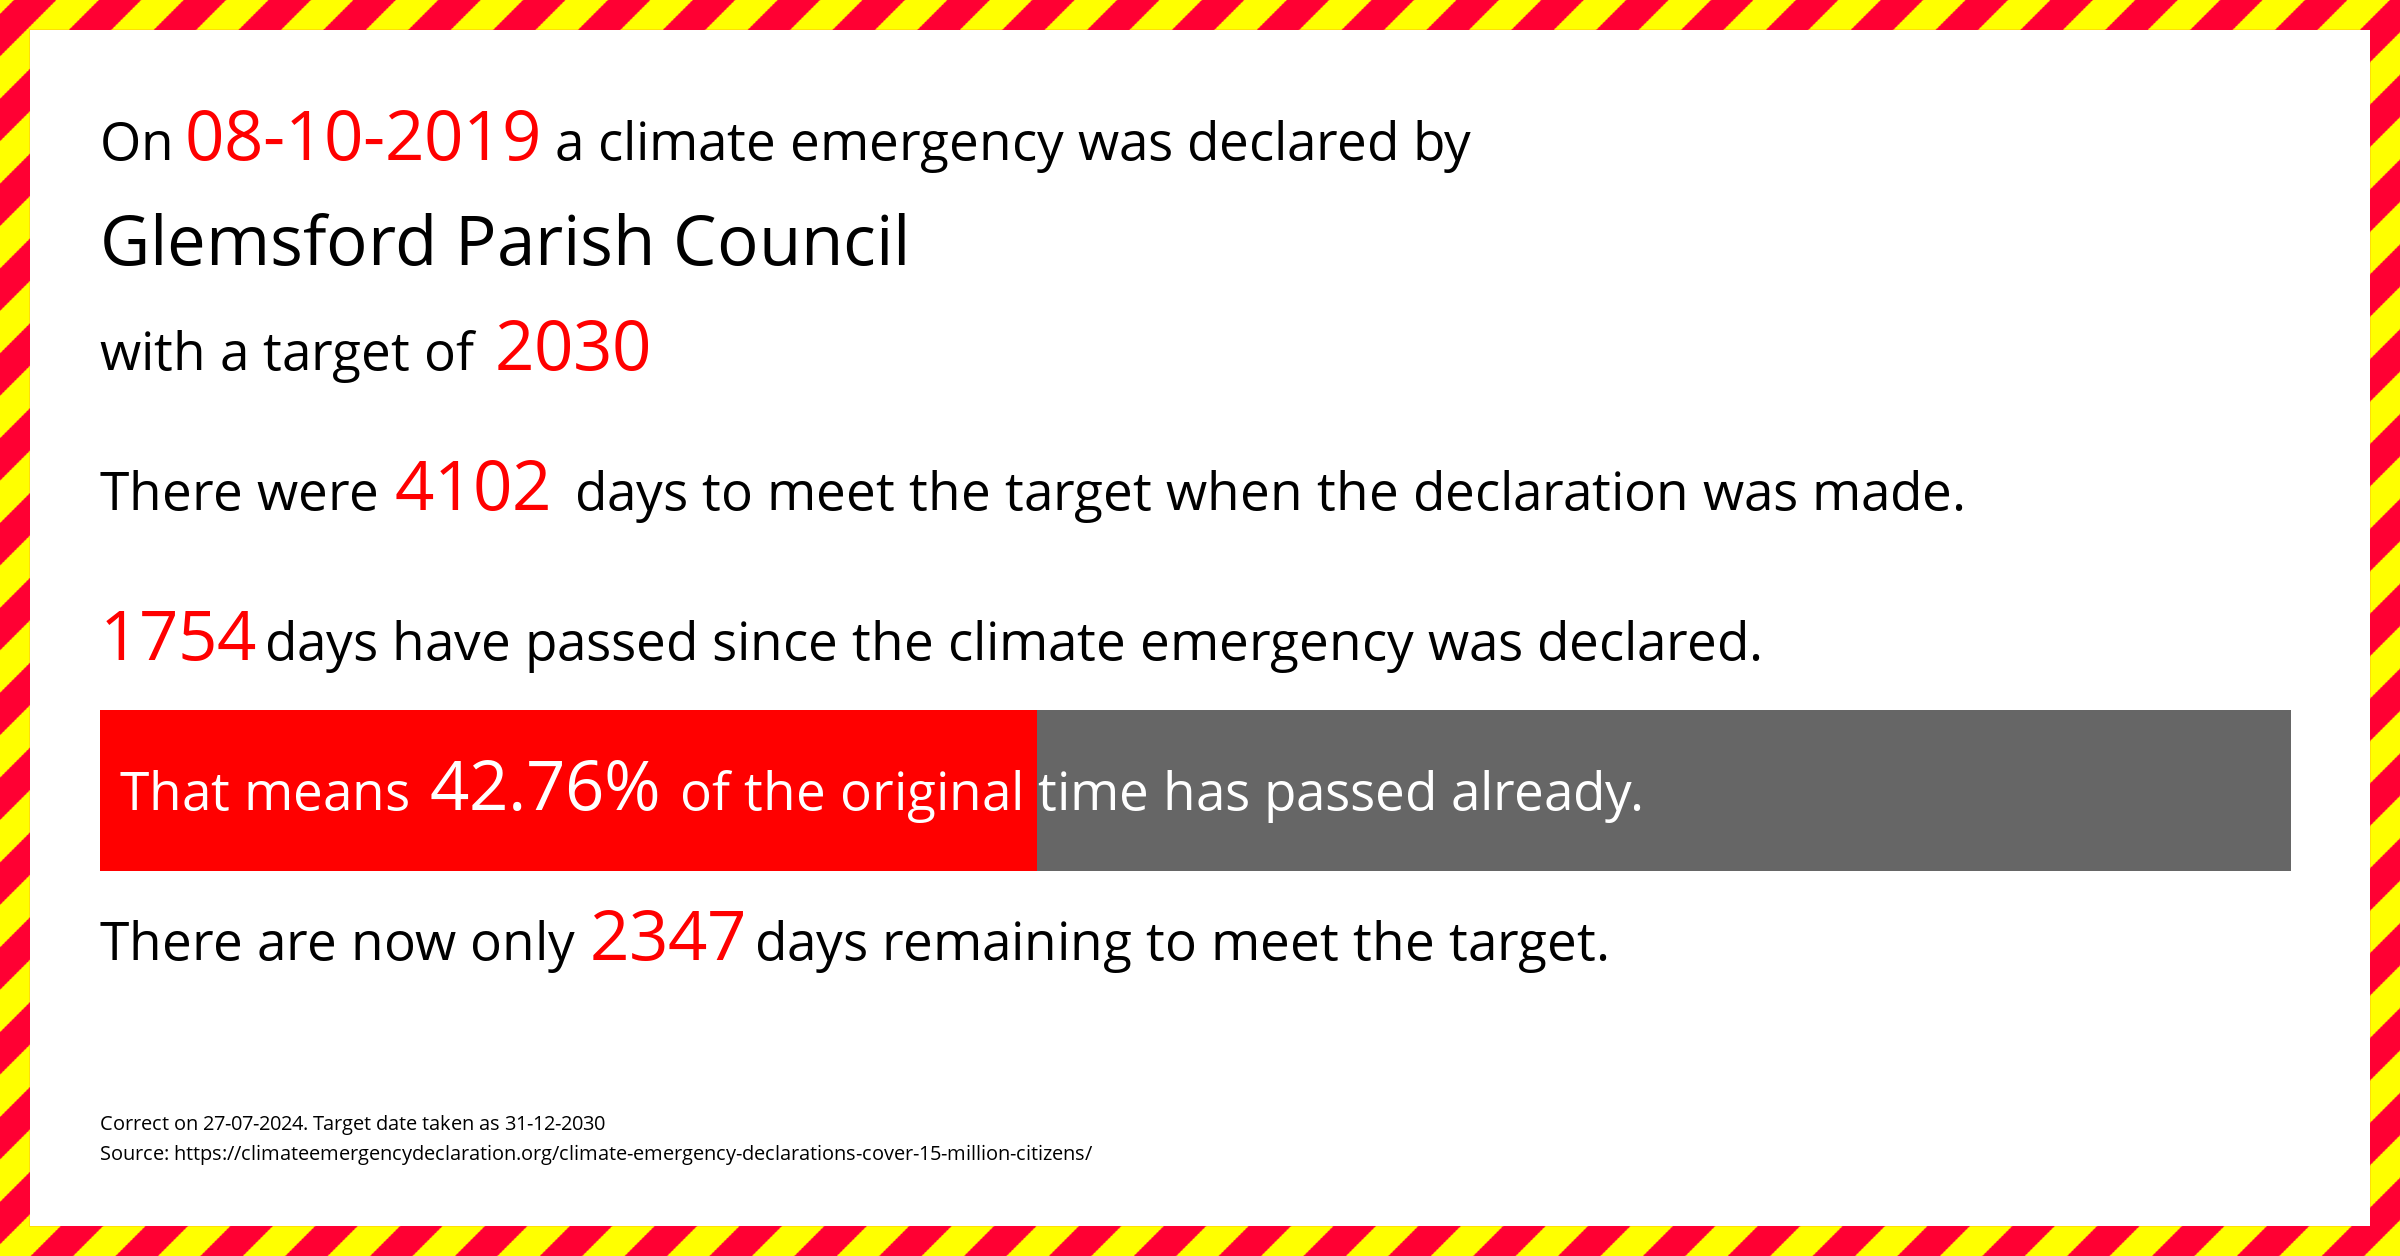 Glemsford Parish Council declared a Climate emergency on Tuesday 8th October 2019, with a target of 2030.